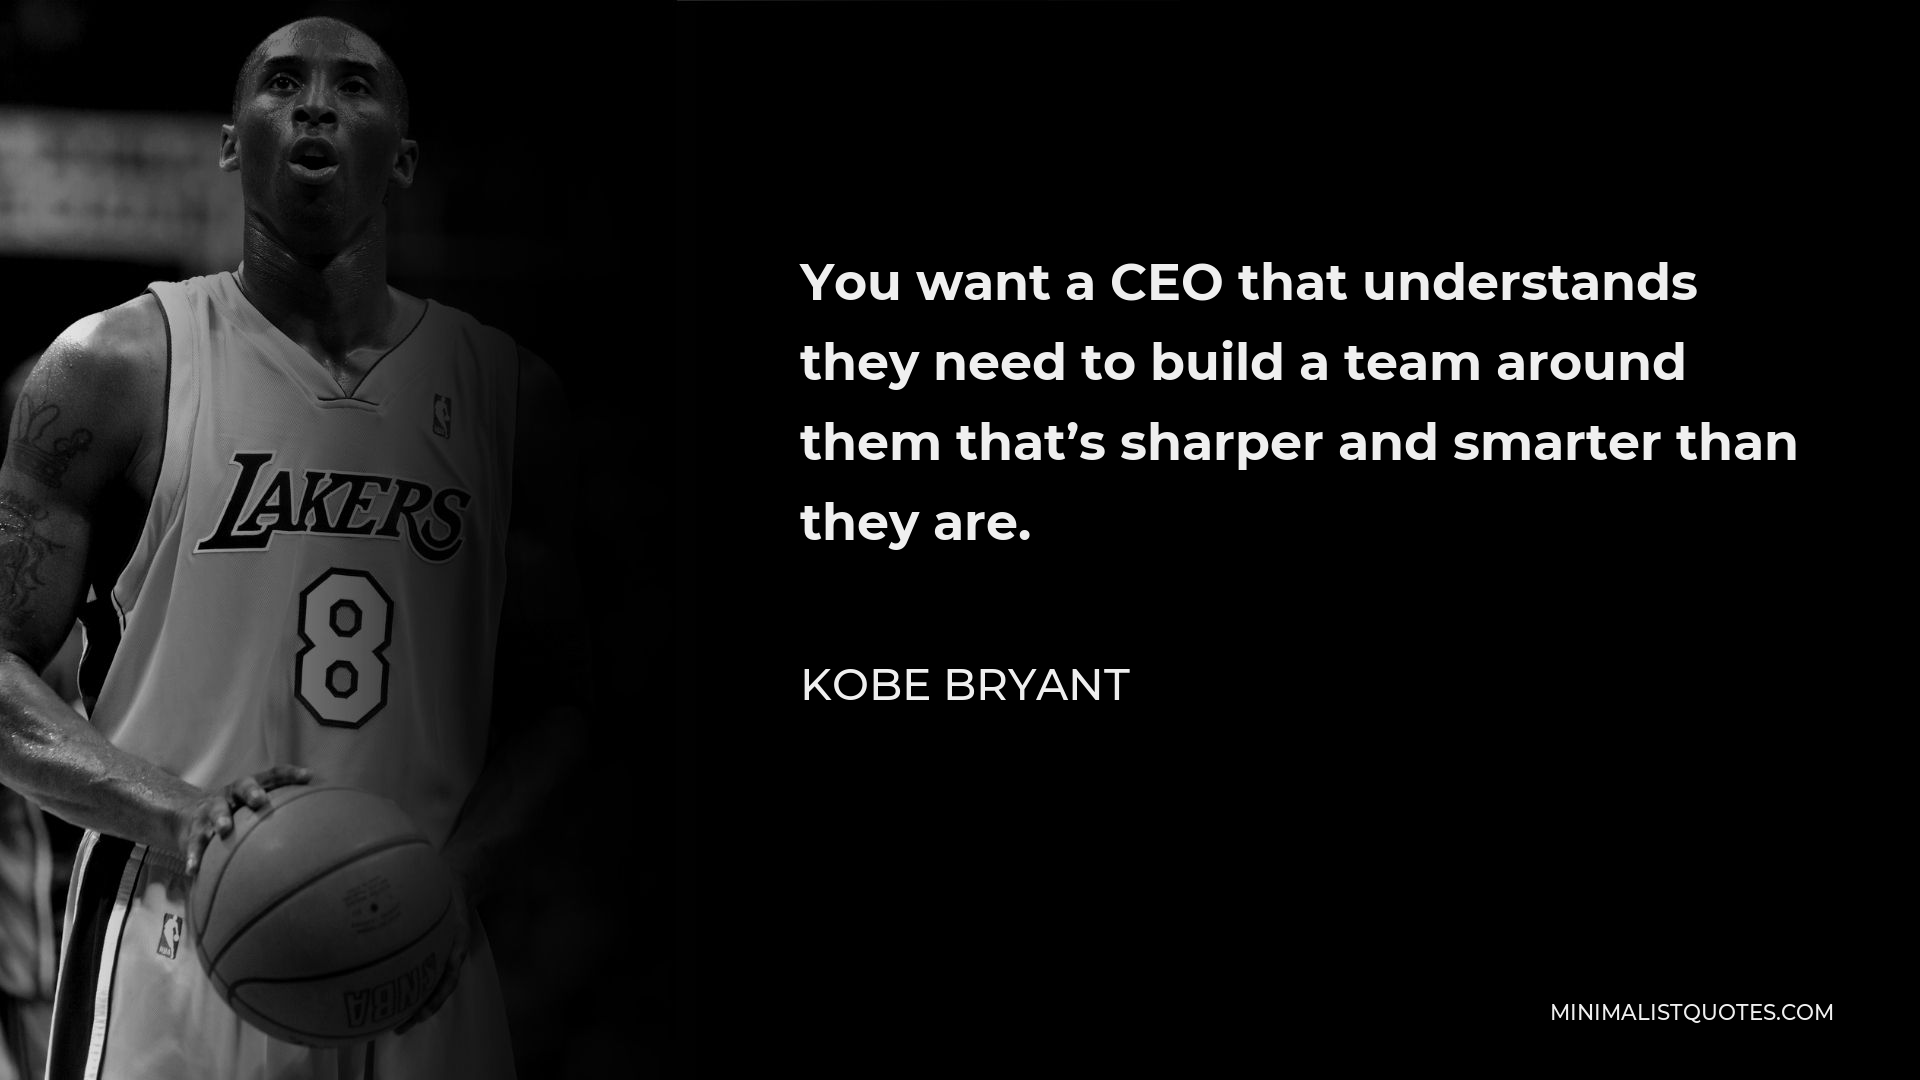 Kobe Bryant Quote - You want a CEO that understands they need to build a team around them that’s sharper and smarter than they are.